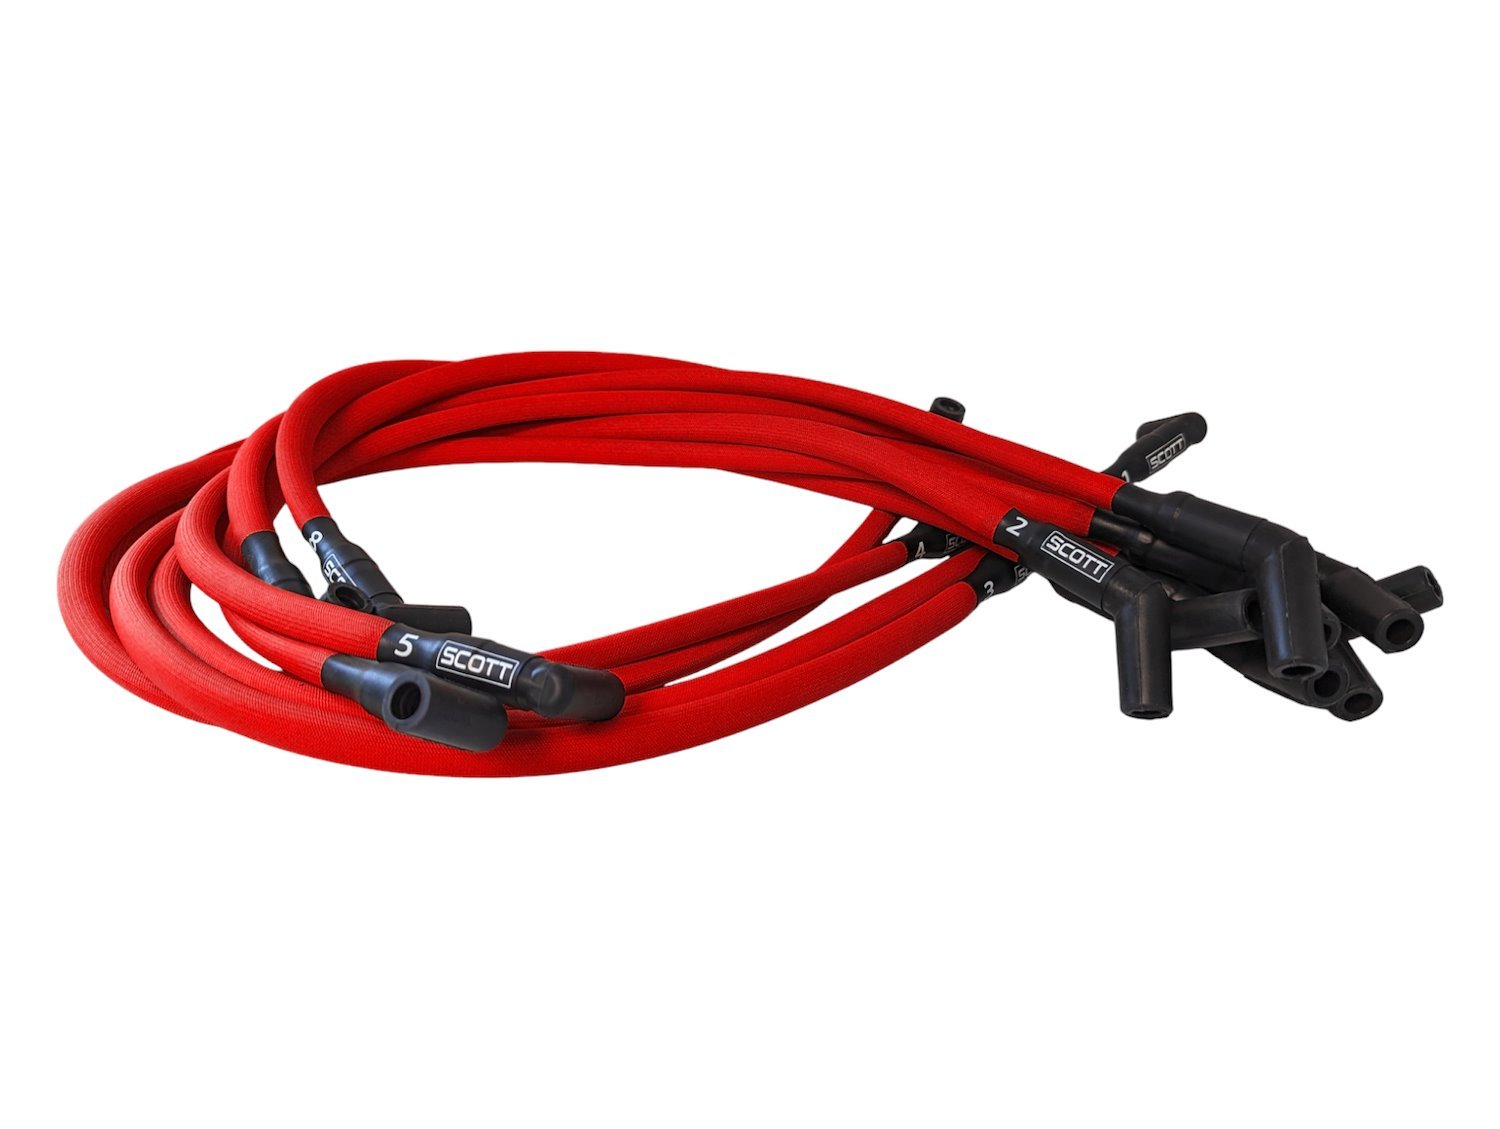 SPW-PS-415-2 High-Performance Fiberglass-Oversleeved Spark Plug Wire Set for Big Block Chevy, Over Valve Cover [Red]